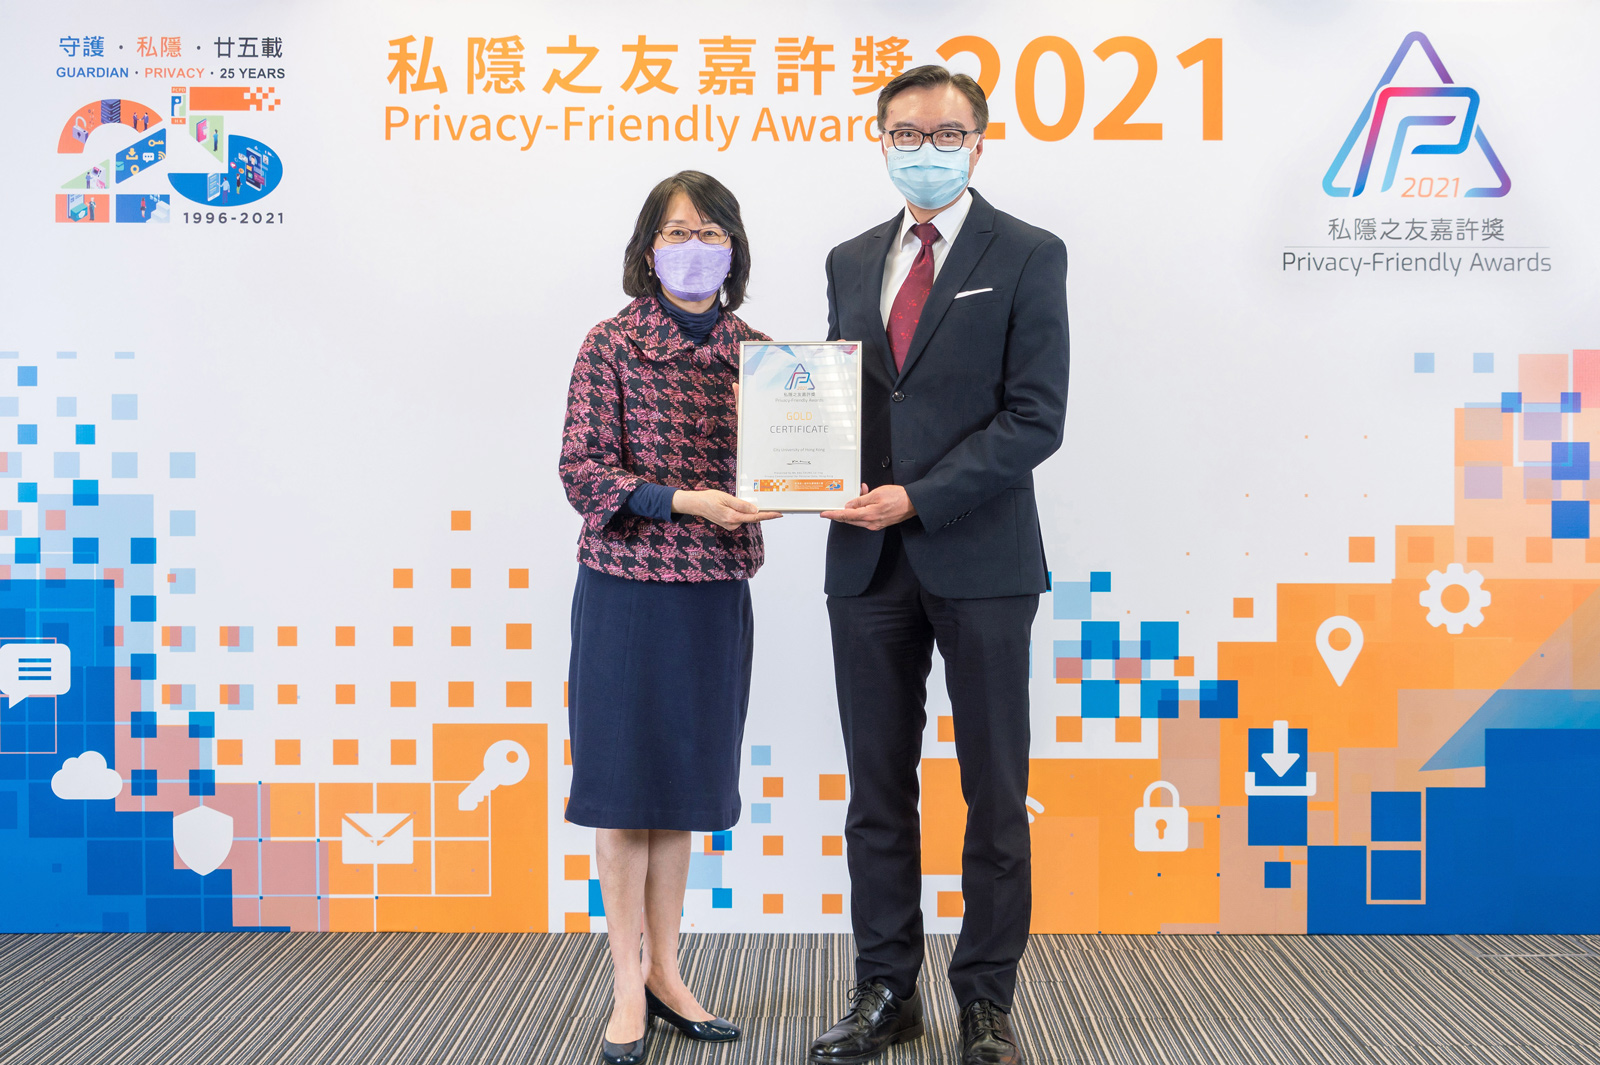 Gold Certificate of Privacy-Friendly Awards 2021 